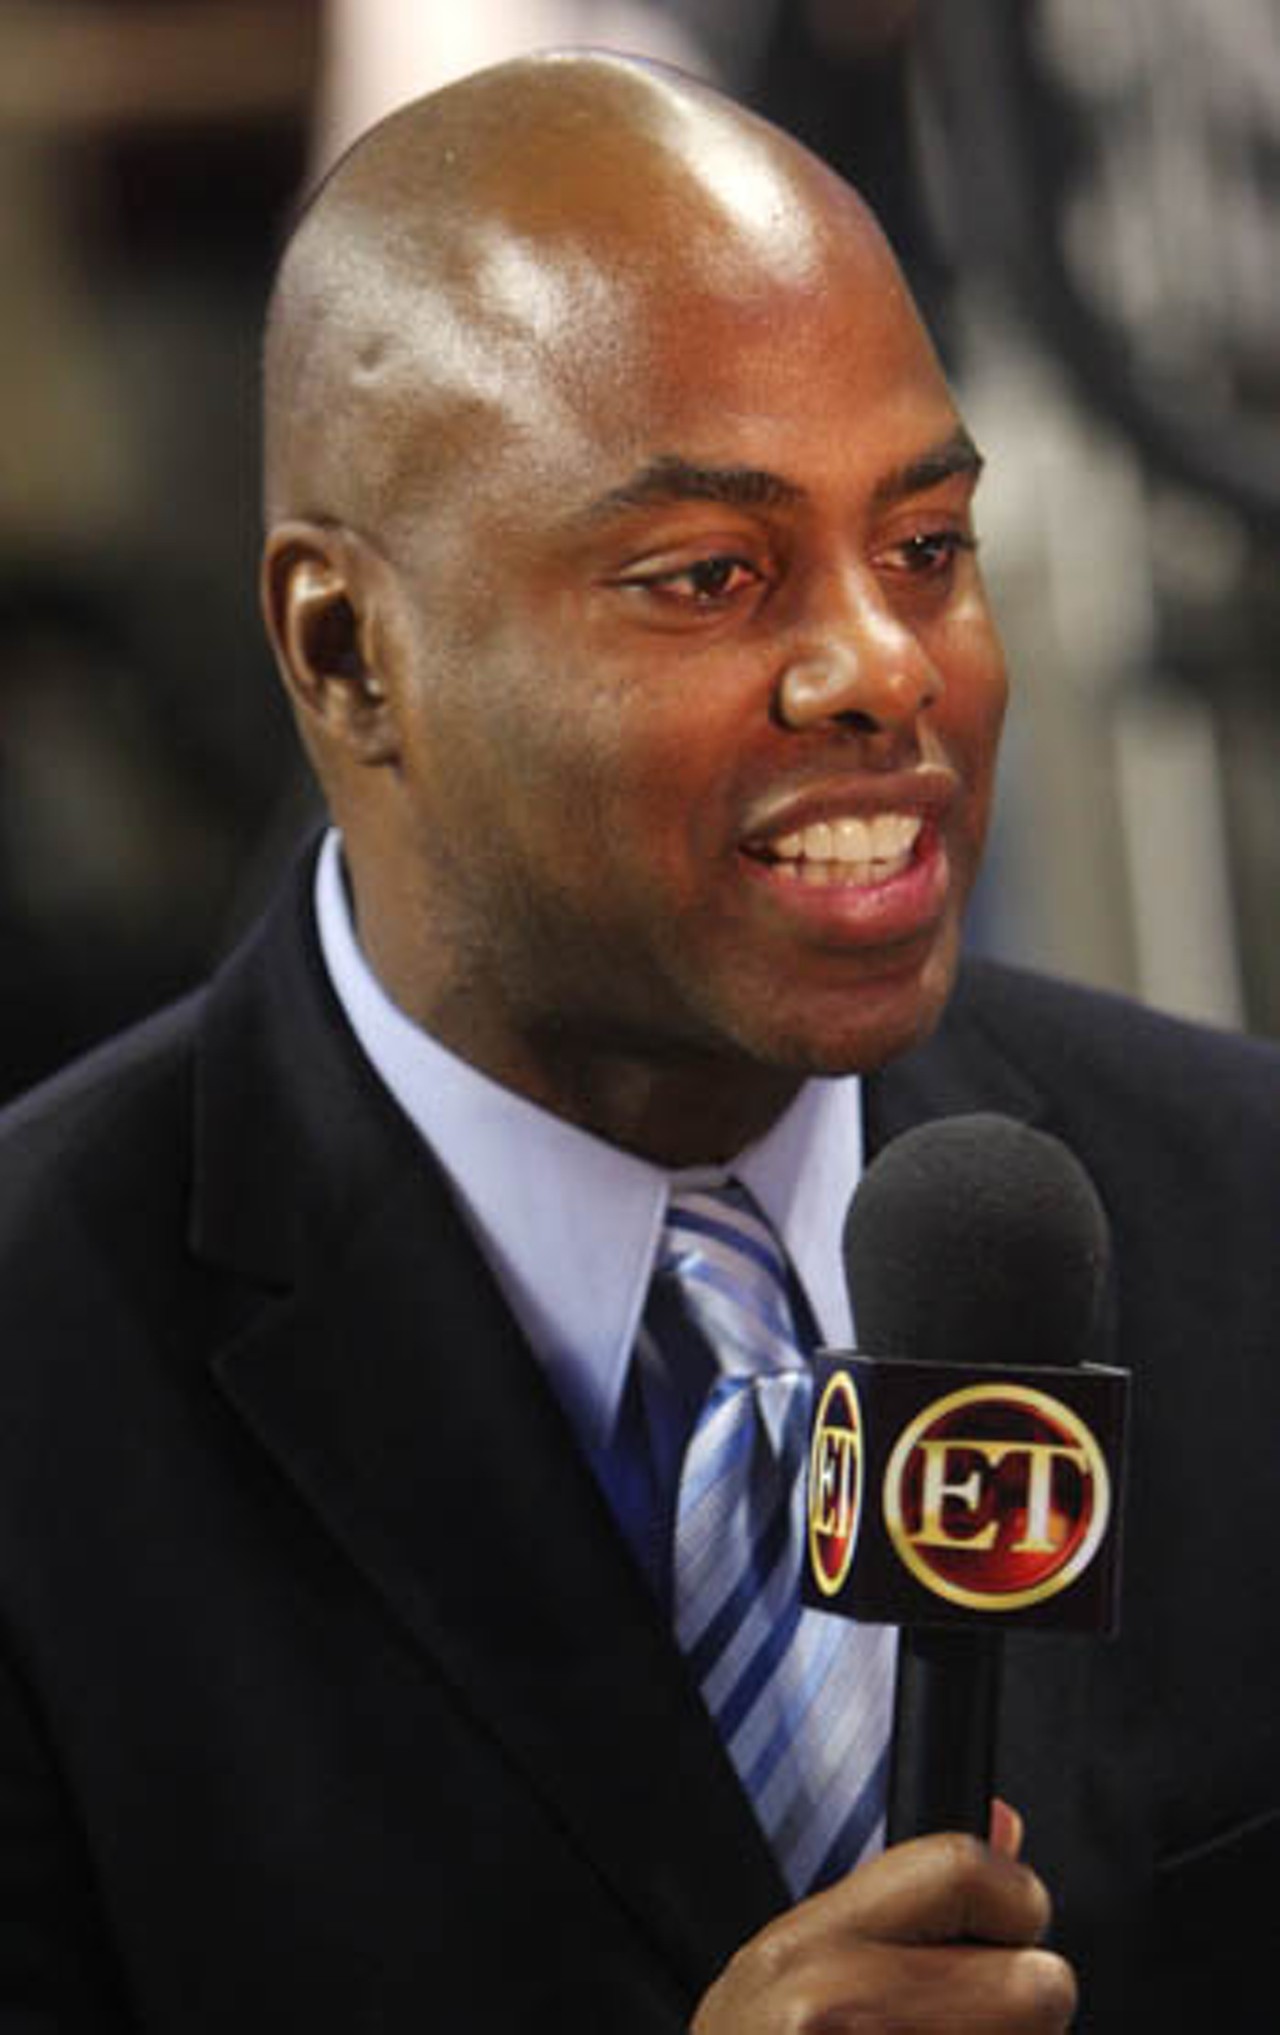 Media outlets from around the country were in St. Louis Thursday evening, including Entertainment Tonight&rsquo;s, Kevin Frazier.Get more coverage from St. Louis, including photos, blogs and video.